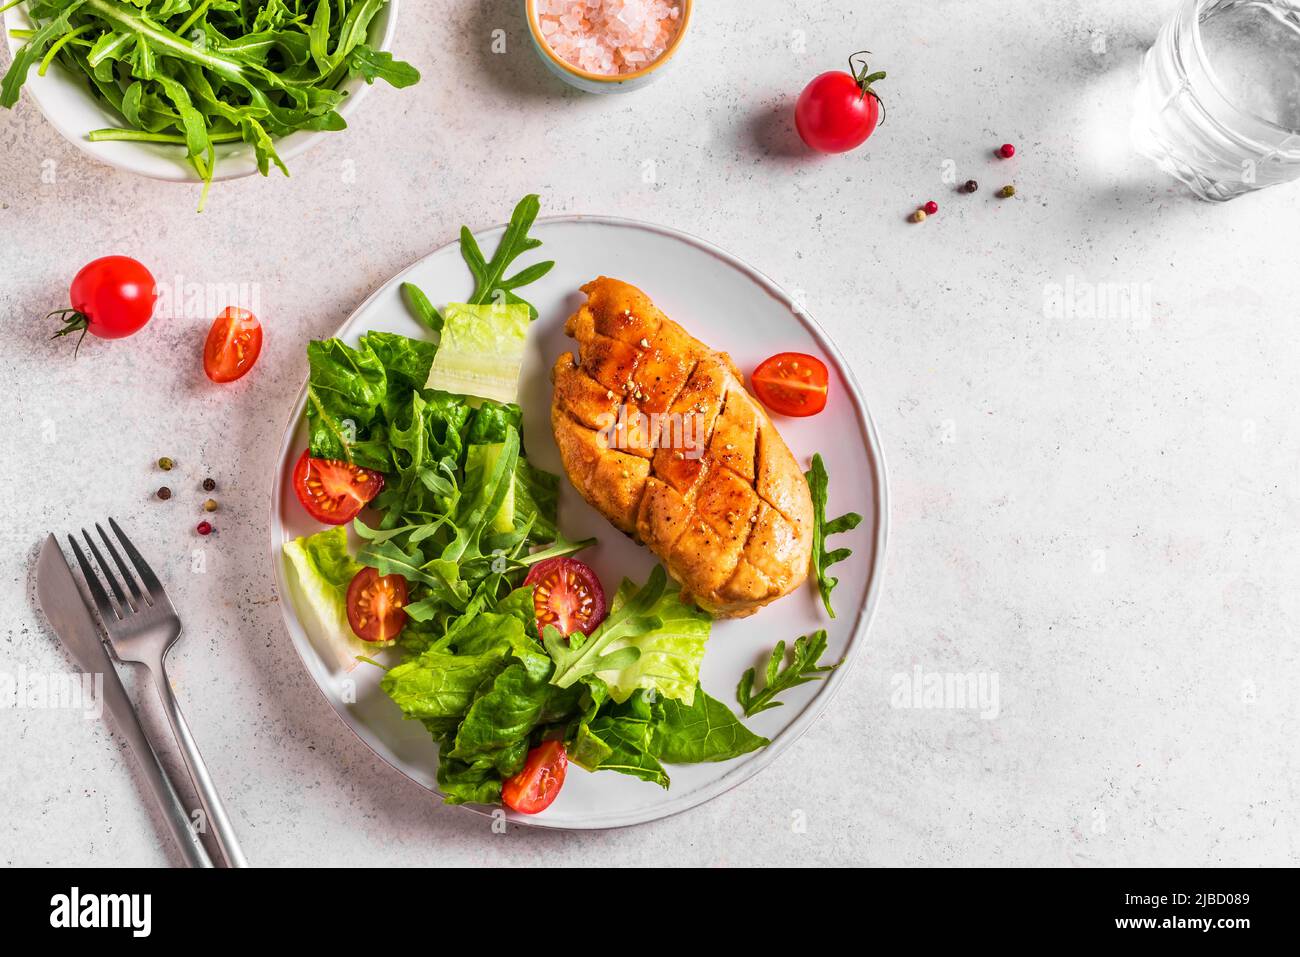 Chicken Salad with fresh vegetables and greens on white table. Roasted Chicken Fillet, green lettuce, arugula, tomatoes salad for healthy lunch. Stock Photo